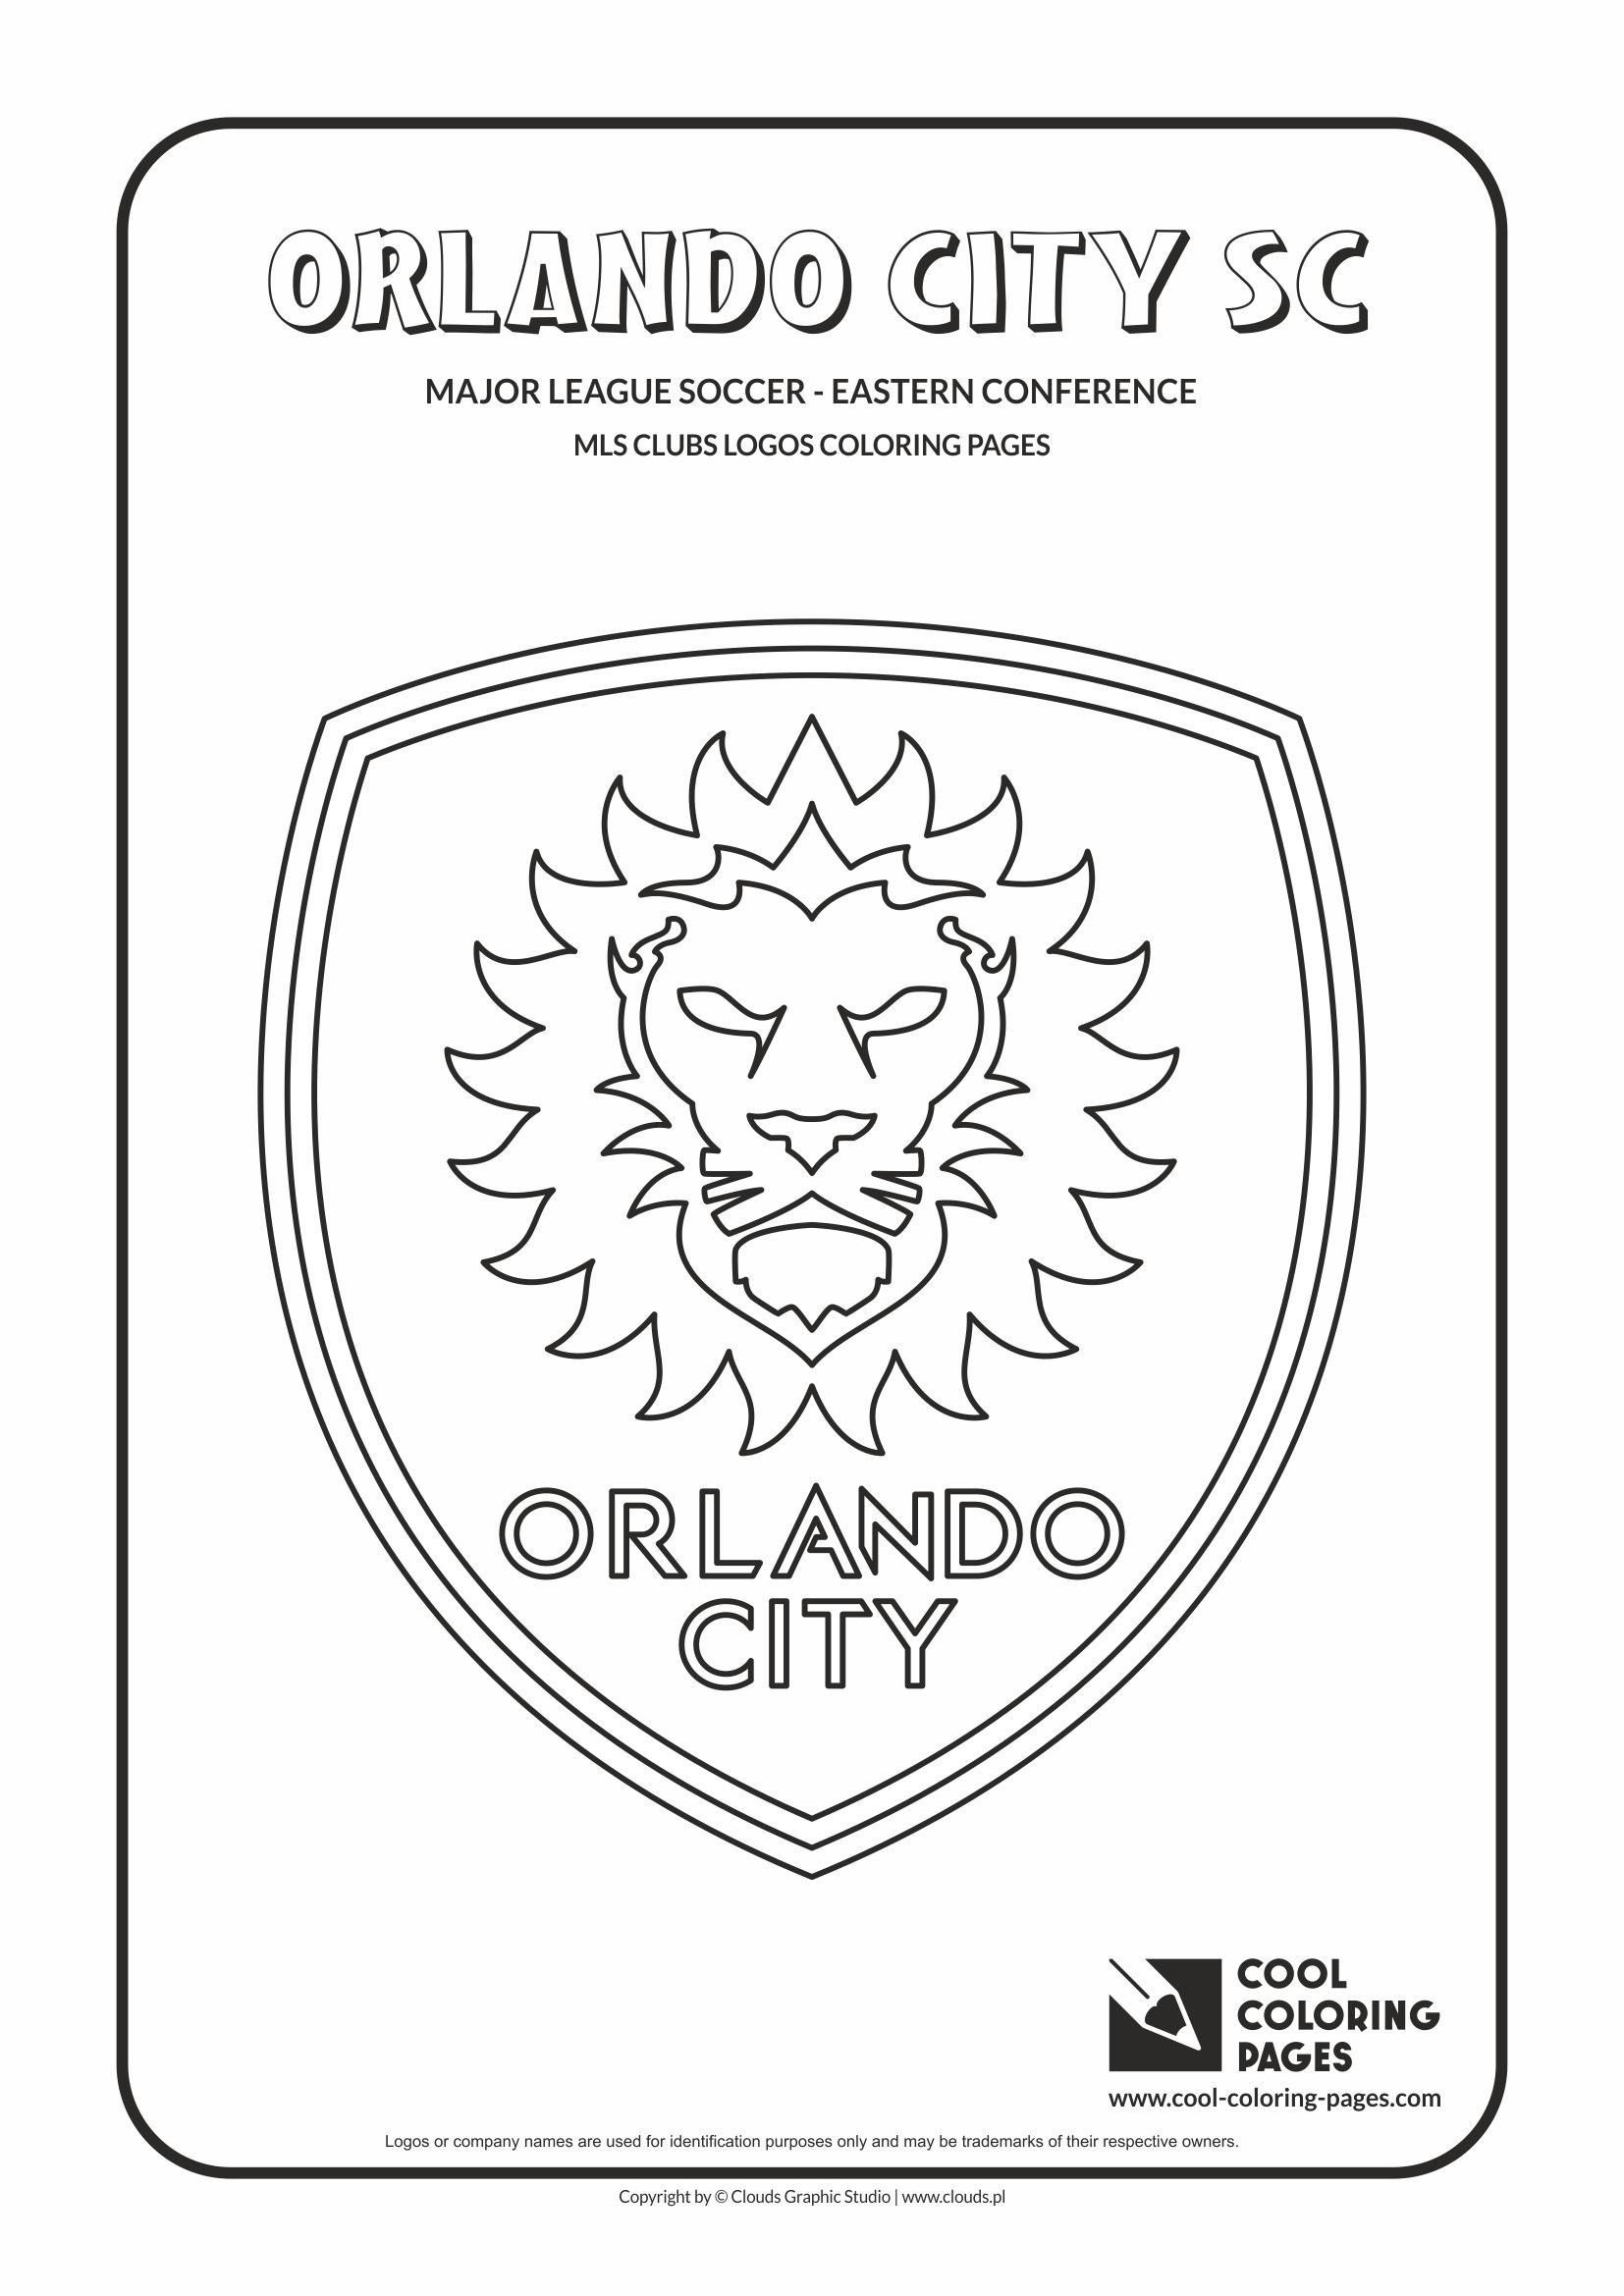 City Coloring Page Cool Coloring Pages Orlando City Sc Logo Coloring Pages Cool